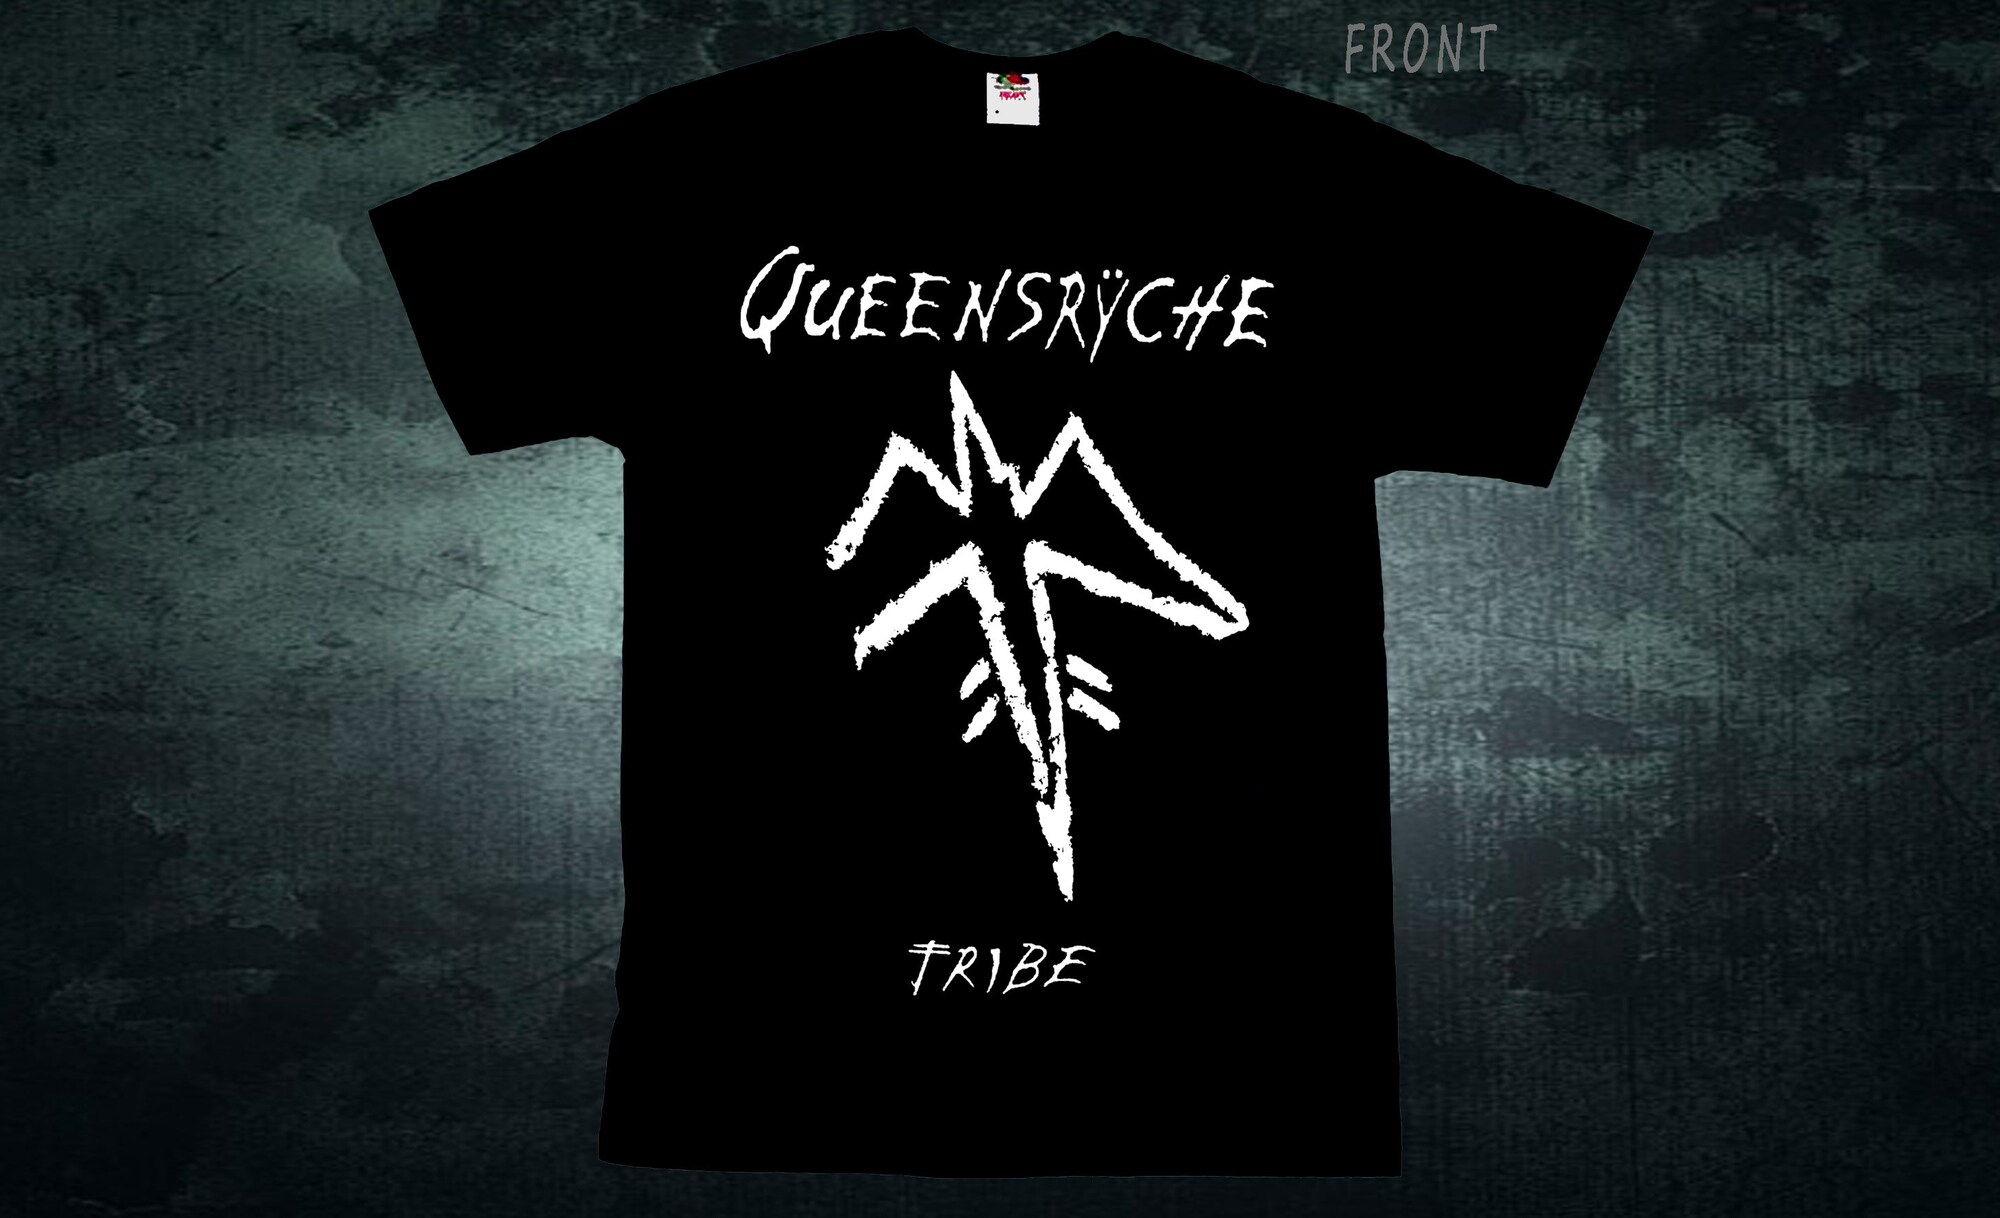 QUEENSRYCHE- Tribe t-shirt